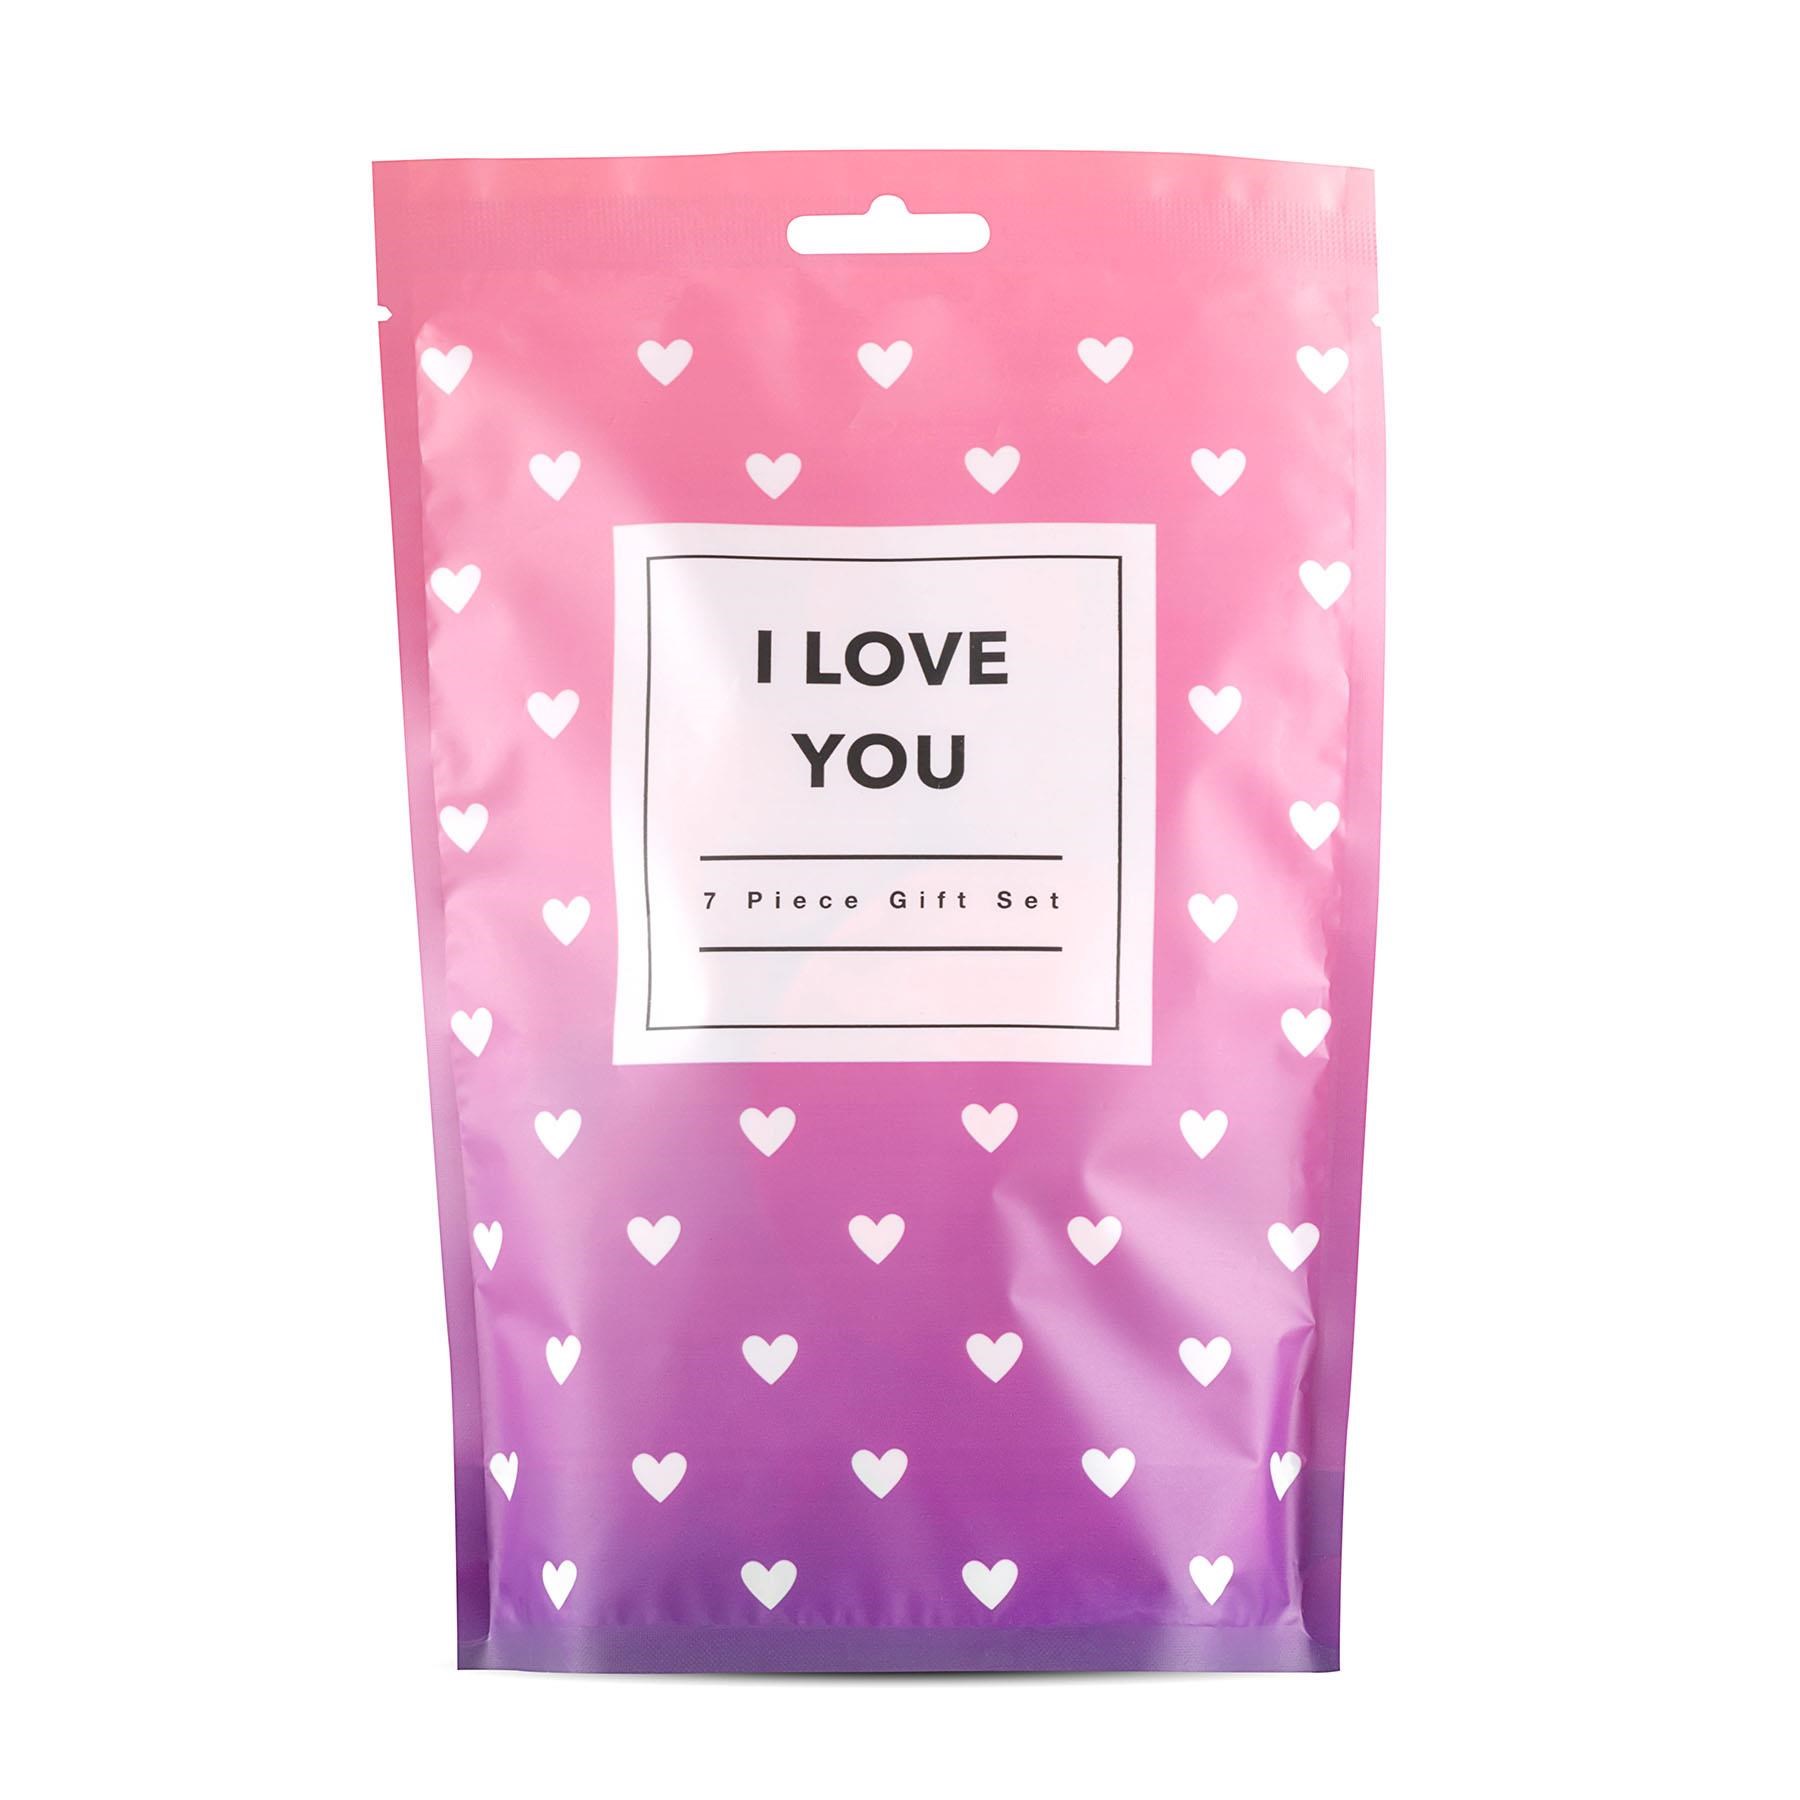 Loveboxxx I Love You 7 Piece Gift Set - Packaging